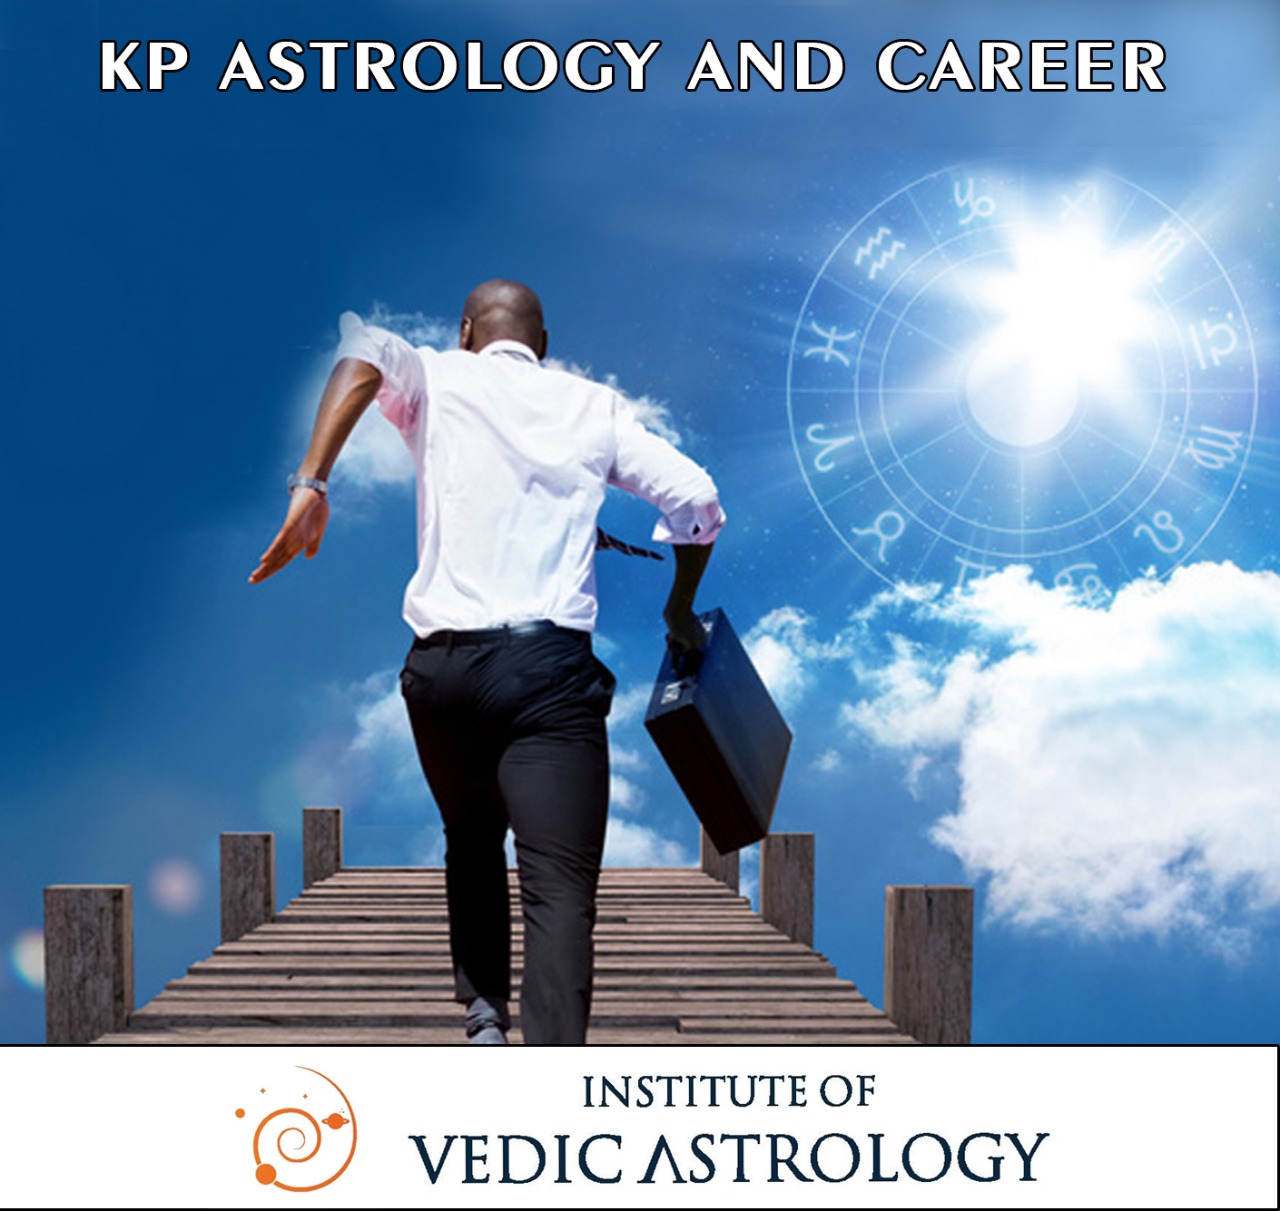 KP Astrology and Career